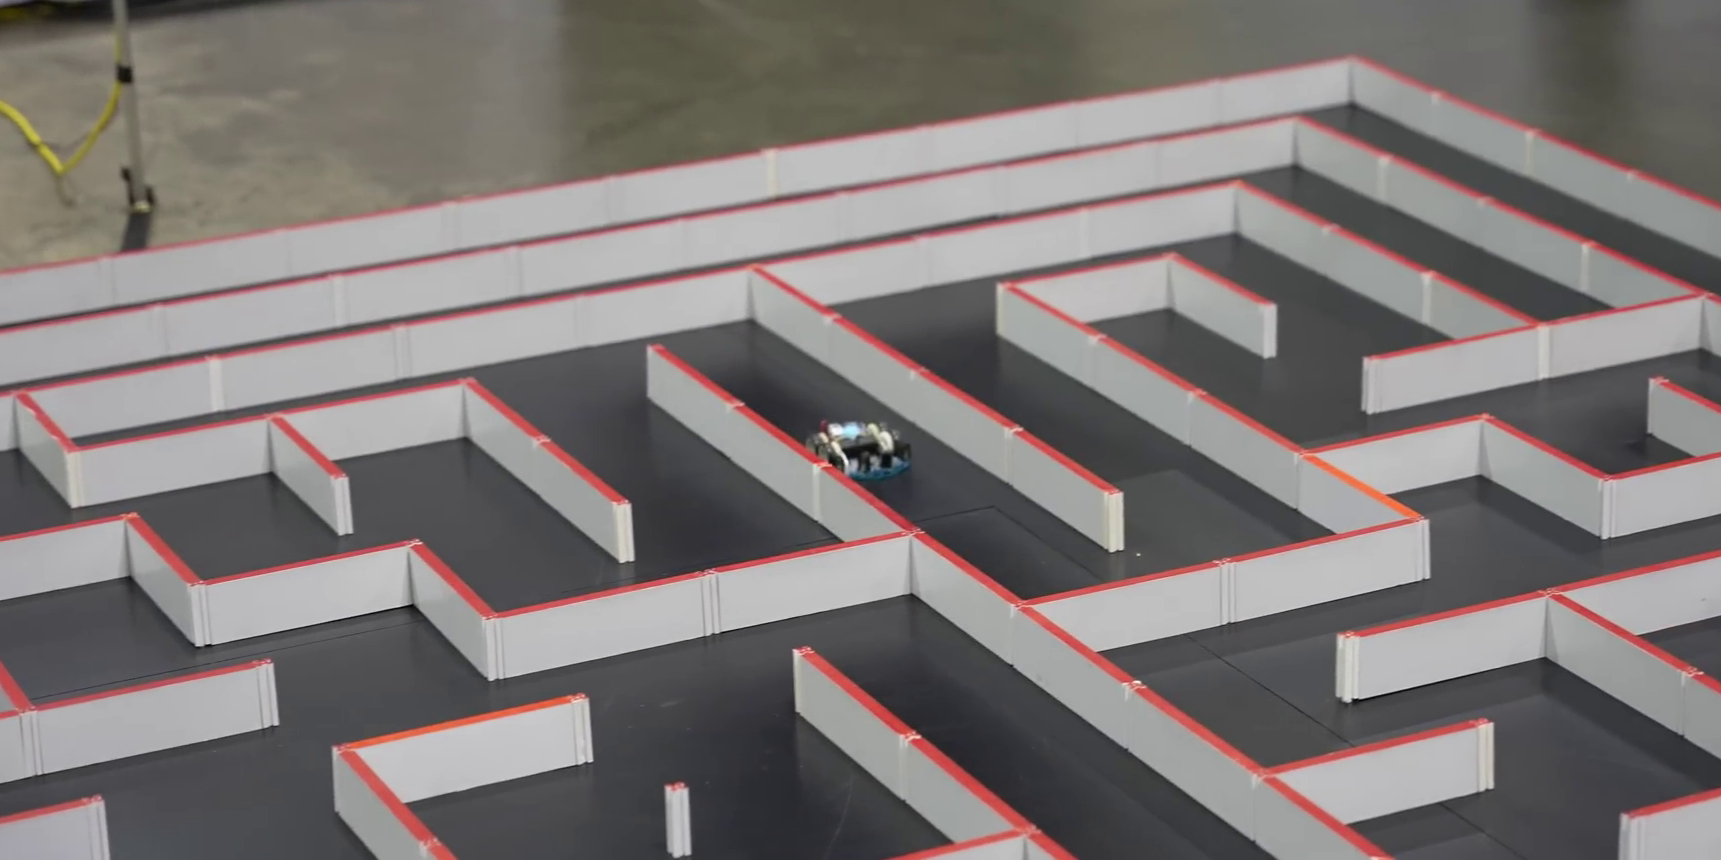 You would think there are only so many ways for a robotic mouse to run a maze, but in its almost 50 year history, competitors in Micromouse events hav